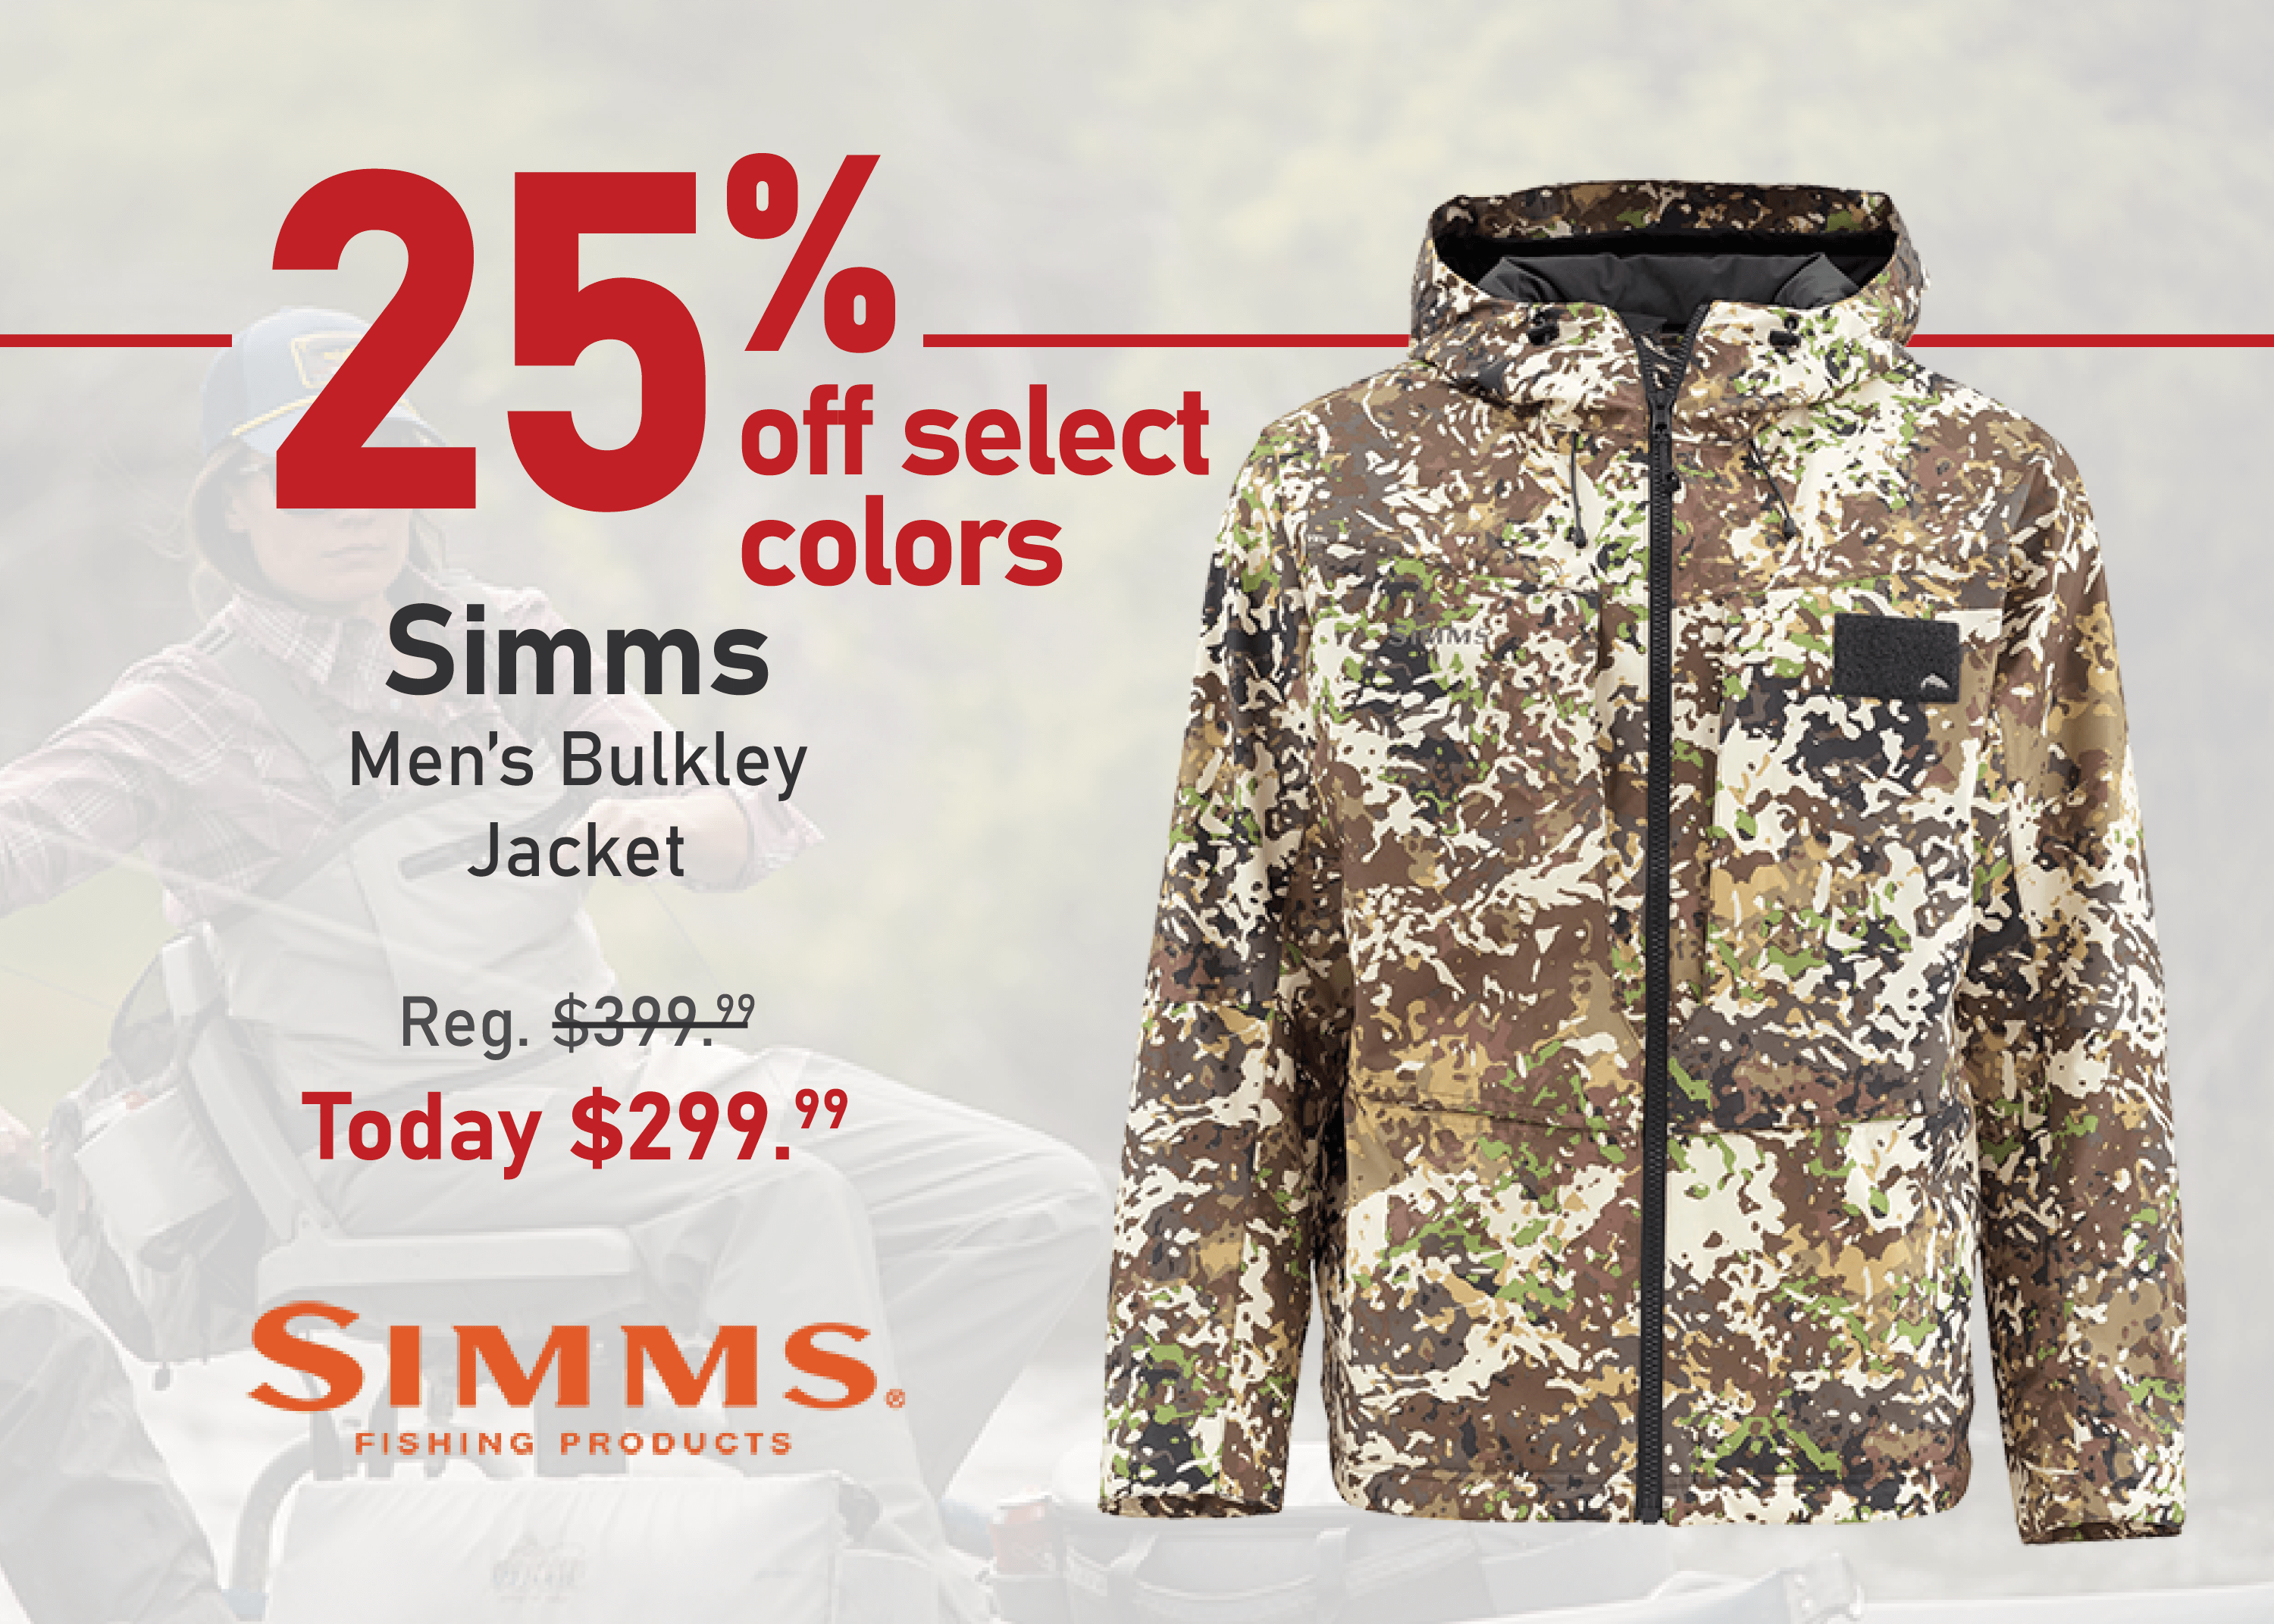 Take 25% off select colors of the Simms Men's Bulkley Jacket